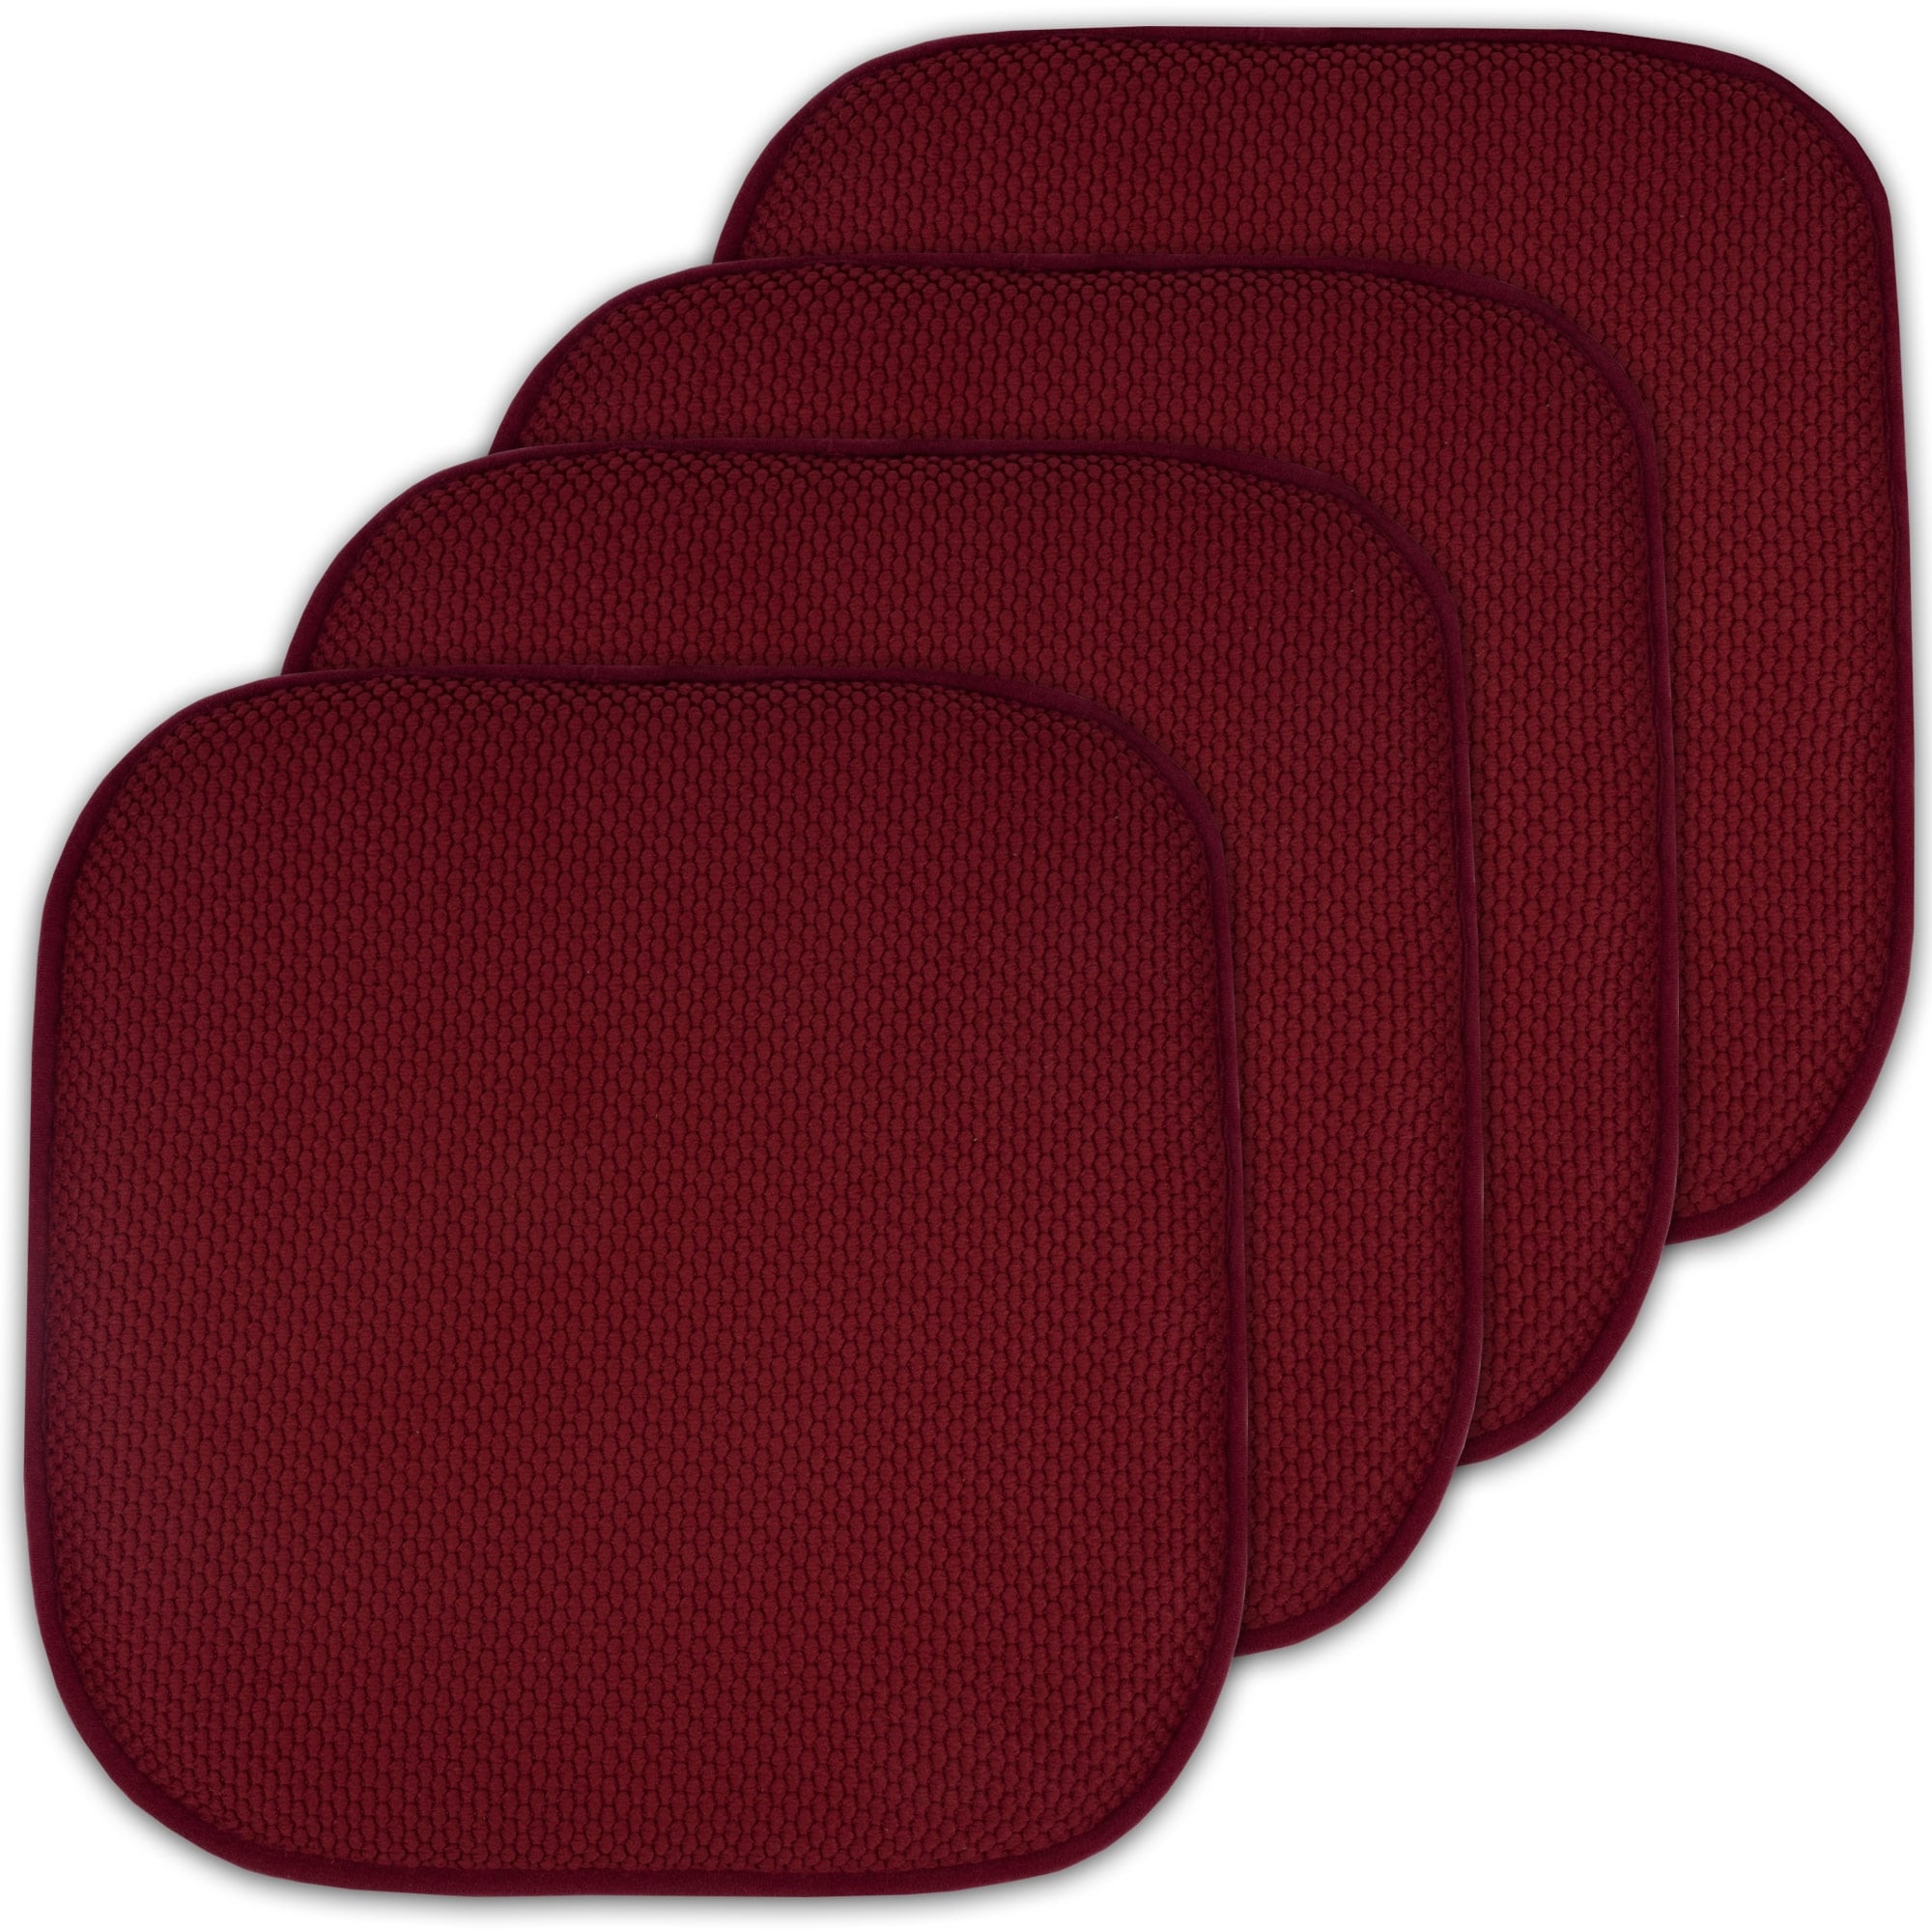 https://ak1.ostkcdn.com/images/products/is/images/direct/6963798cc2731399f110239a48ca53fa9faf9937/16x16-Memory-Foam-Chair-Pad-Seat-Cushion-with-Non-Slip-Backing-%282-or-4-Pack%29.jpg